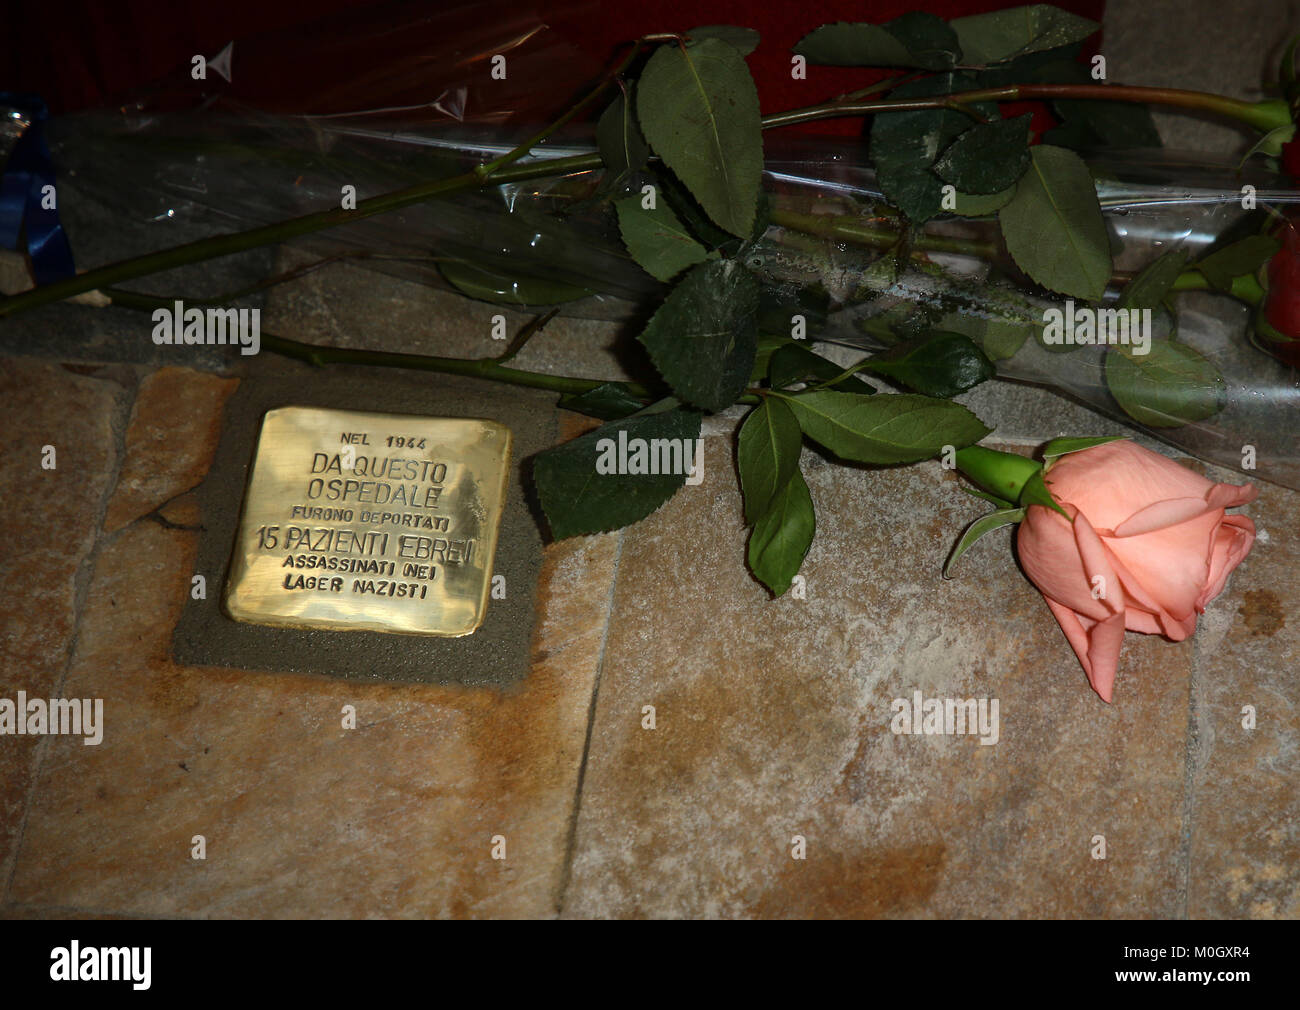 Venice, Italy. 22nd Jan, 2018. On the occasion of the celebrations for the Day of Remembrance, the ceremony will be held for the installation of 18 new 'Stones of Inciampo', in memory of the Venetian citizens and citizens who were deported to the Nazi extermination camps. At the Civil Hospital, a 'collective' Stone was dedicated to the fifteen Jewish patients deported from the hospital during 1944. Credit: Independent Photo Agency/Alamy Live News Stock Photo